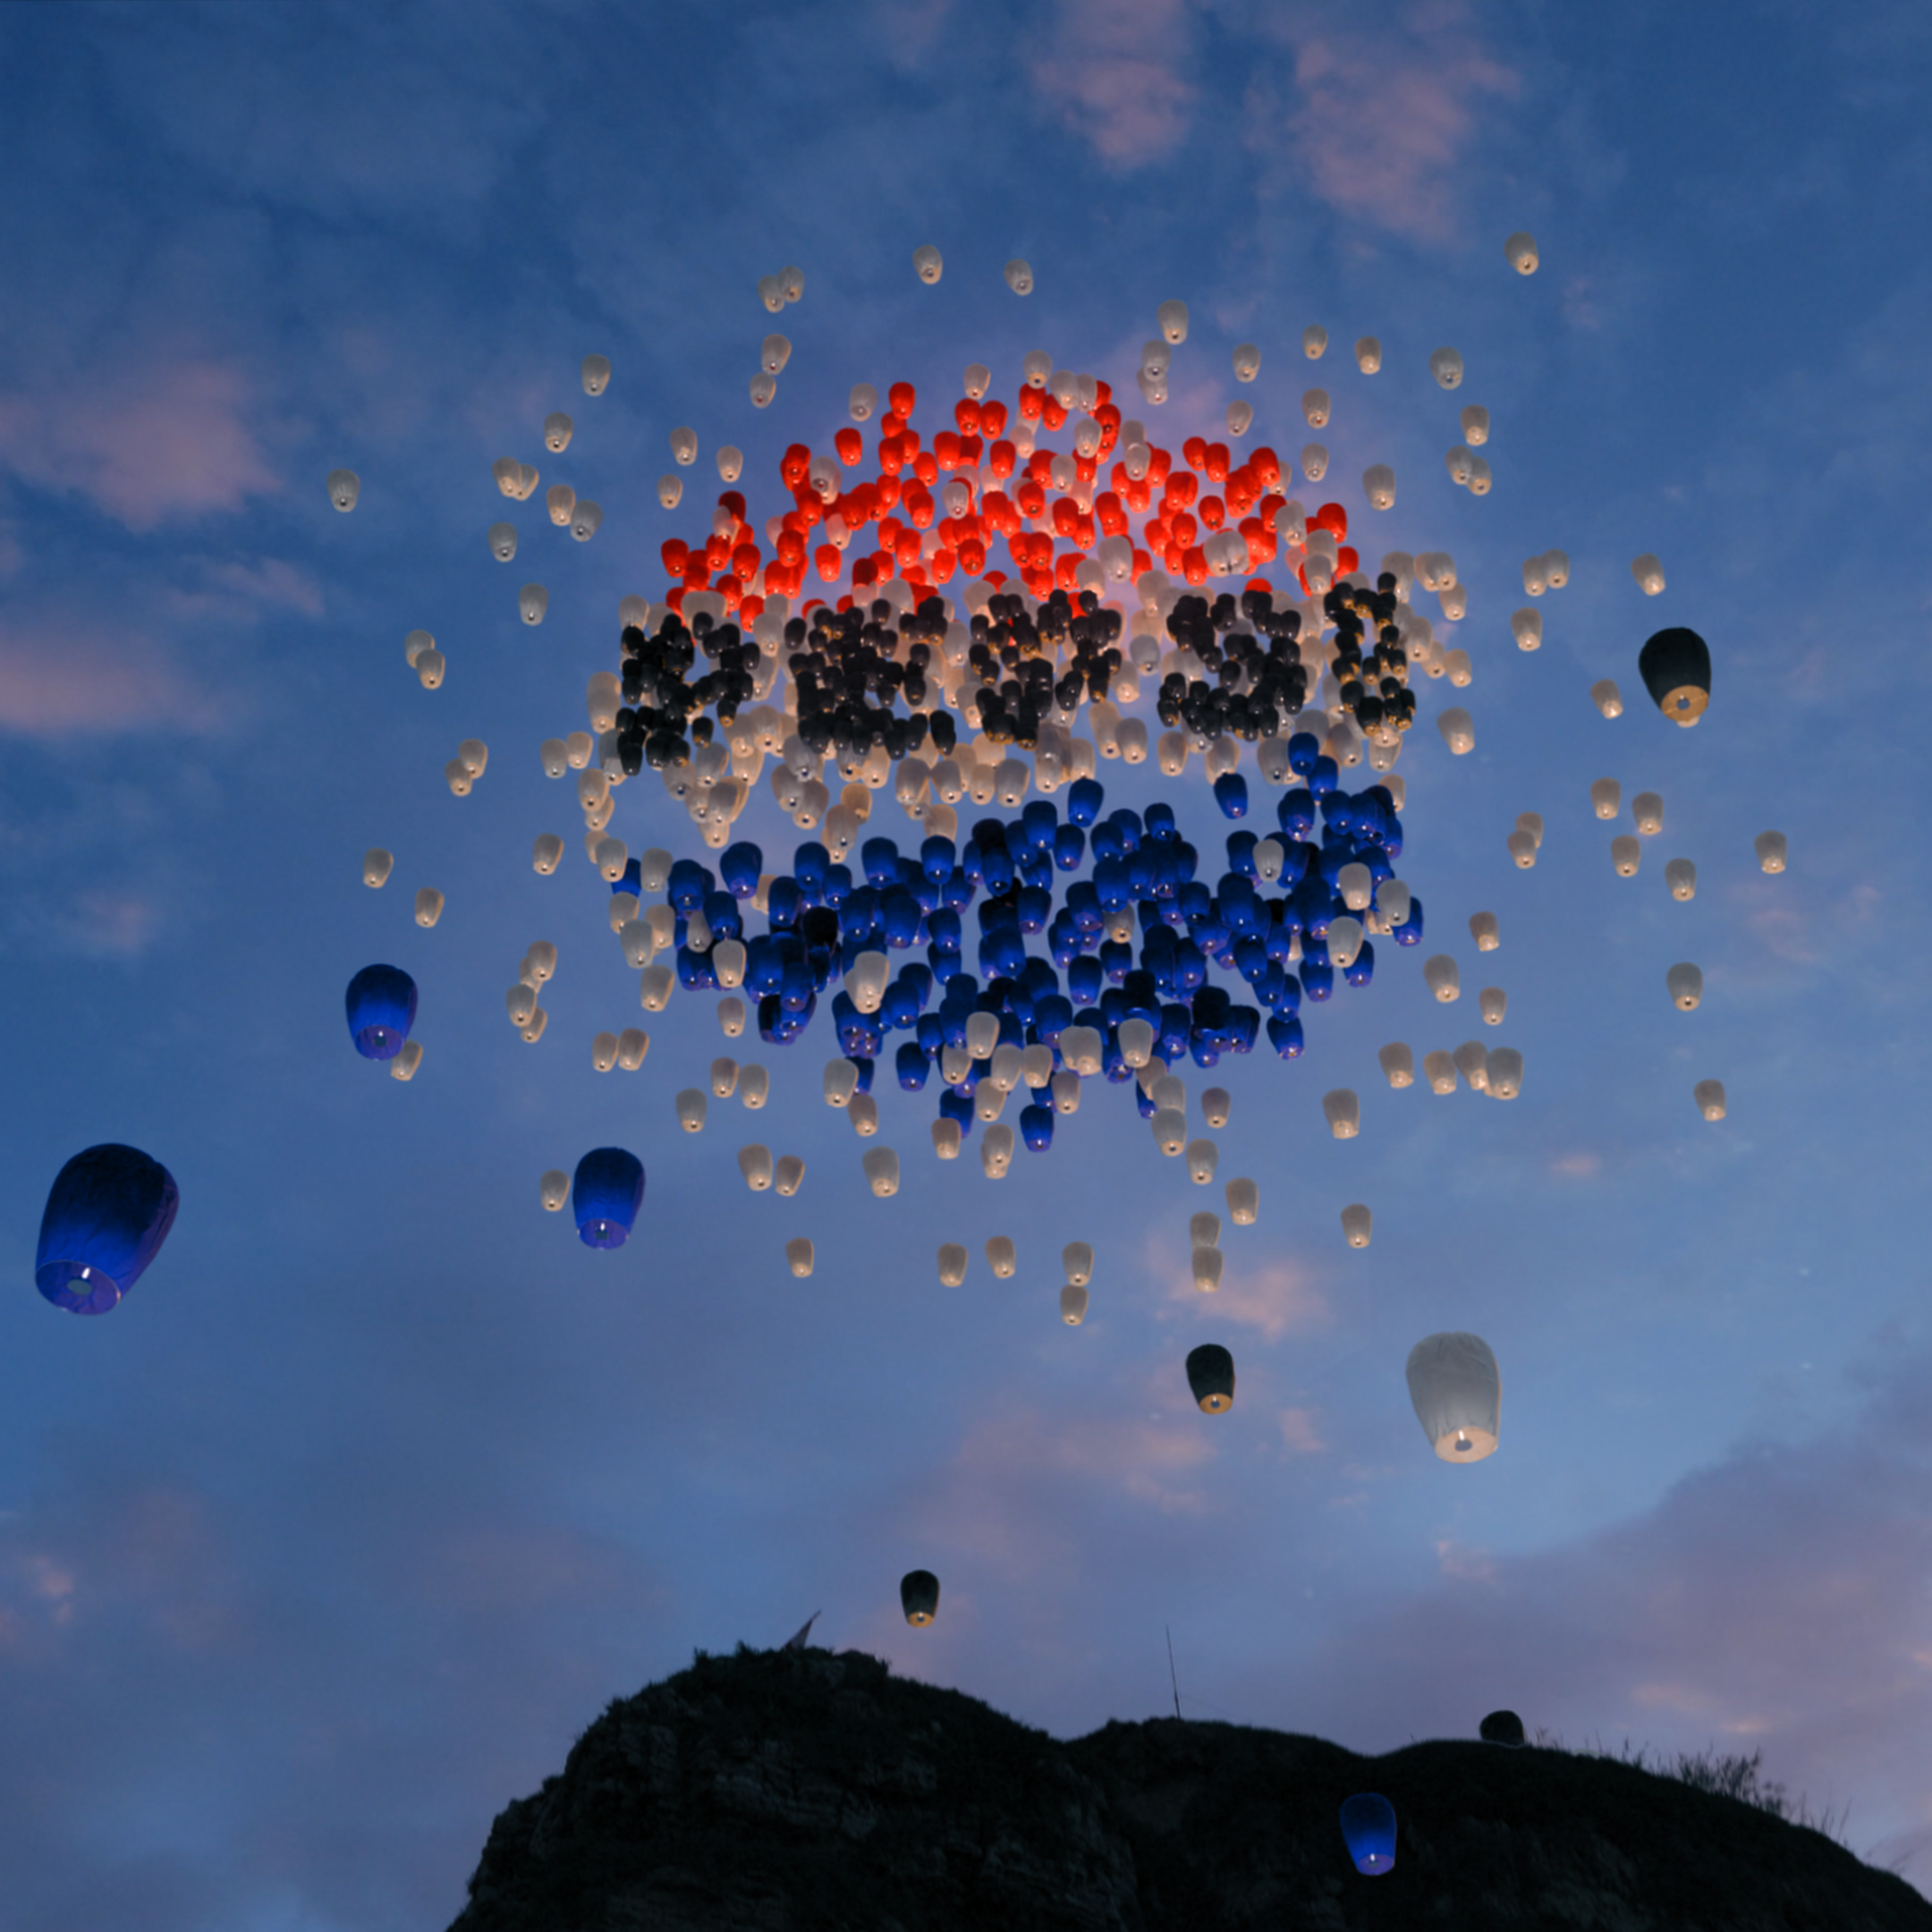 A sunset sky with numerous balloons creating a colorful pattern above a silhouette of a hill